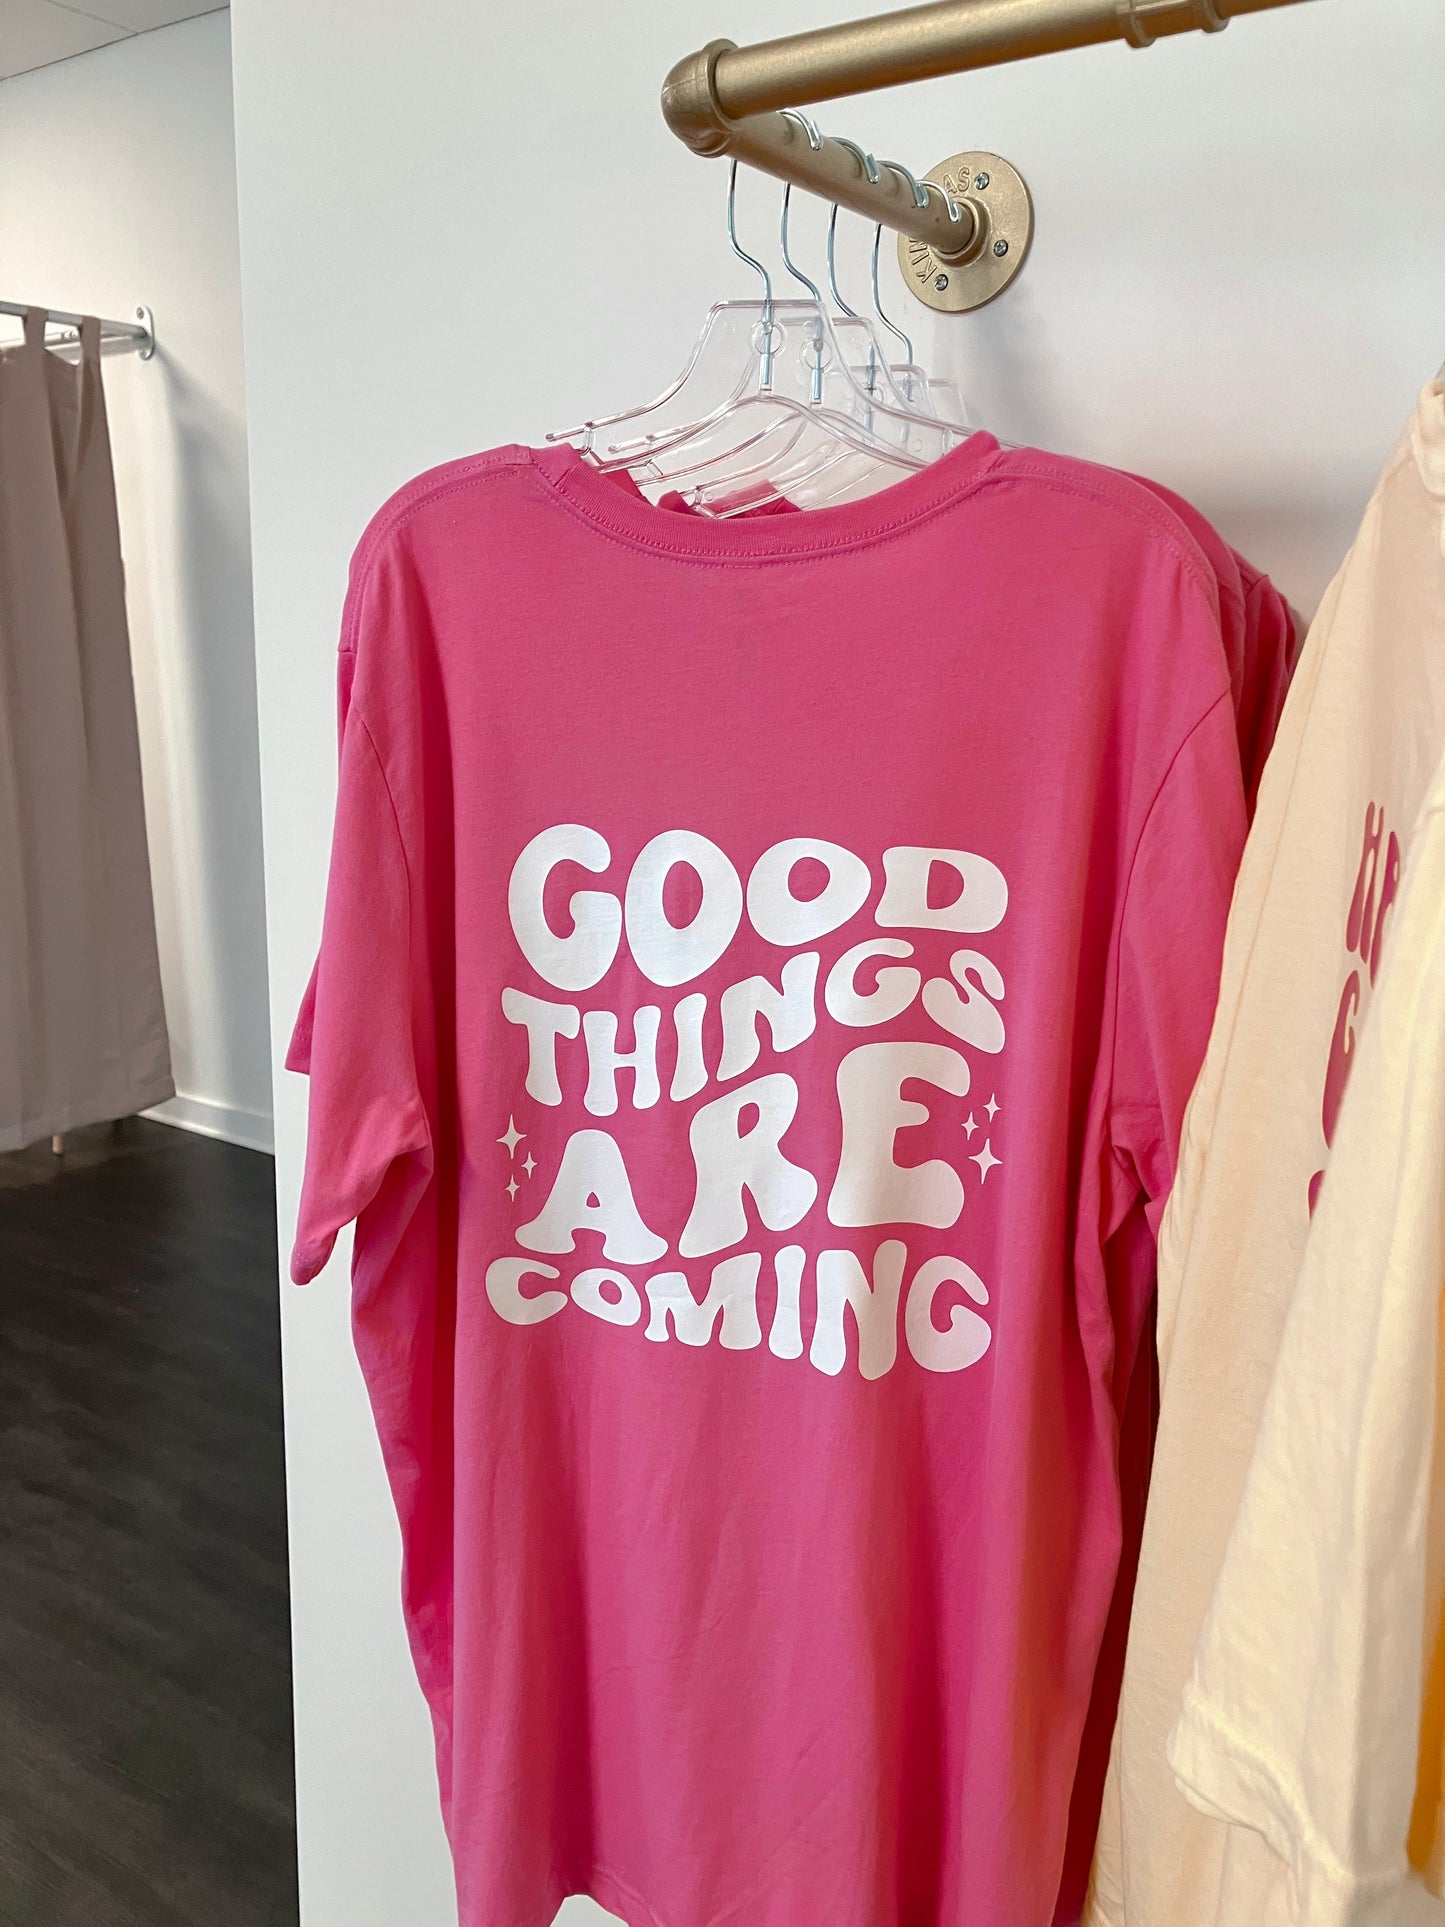 Good things are coming tee